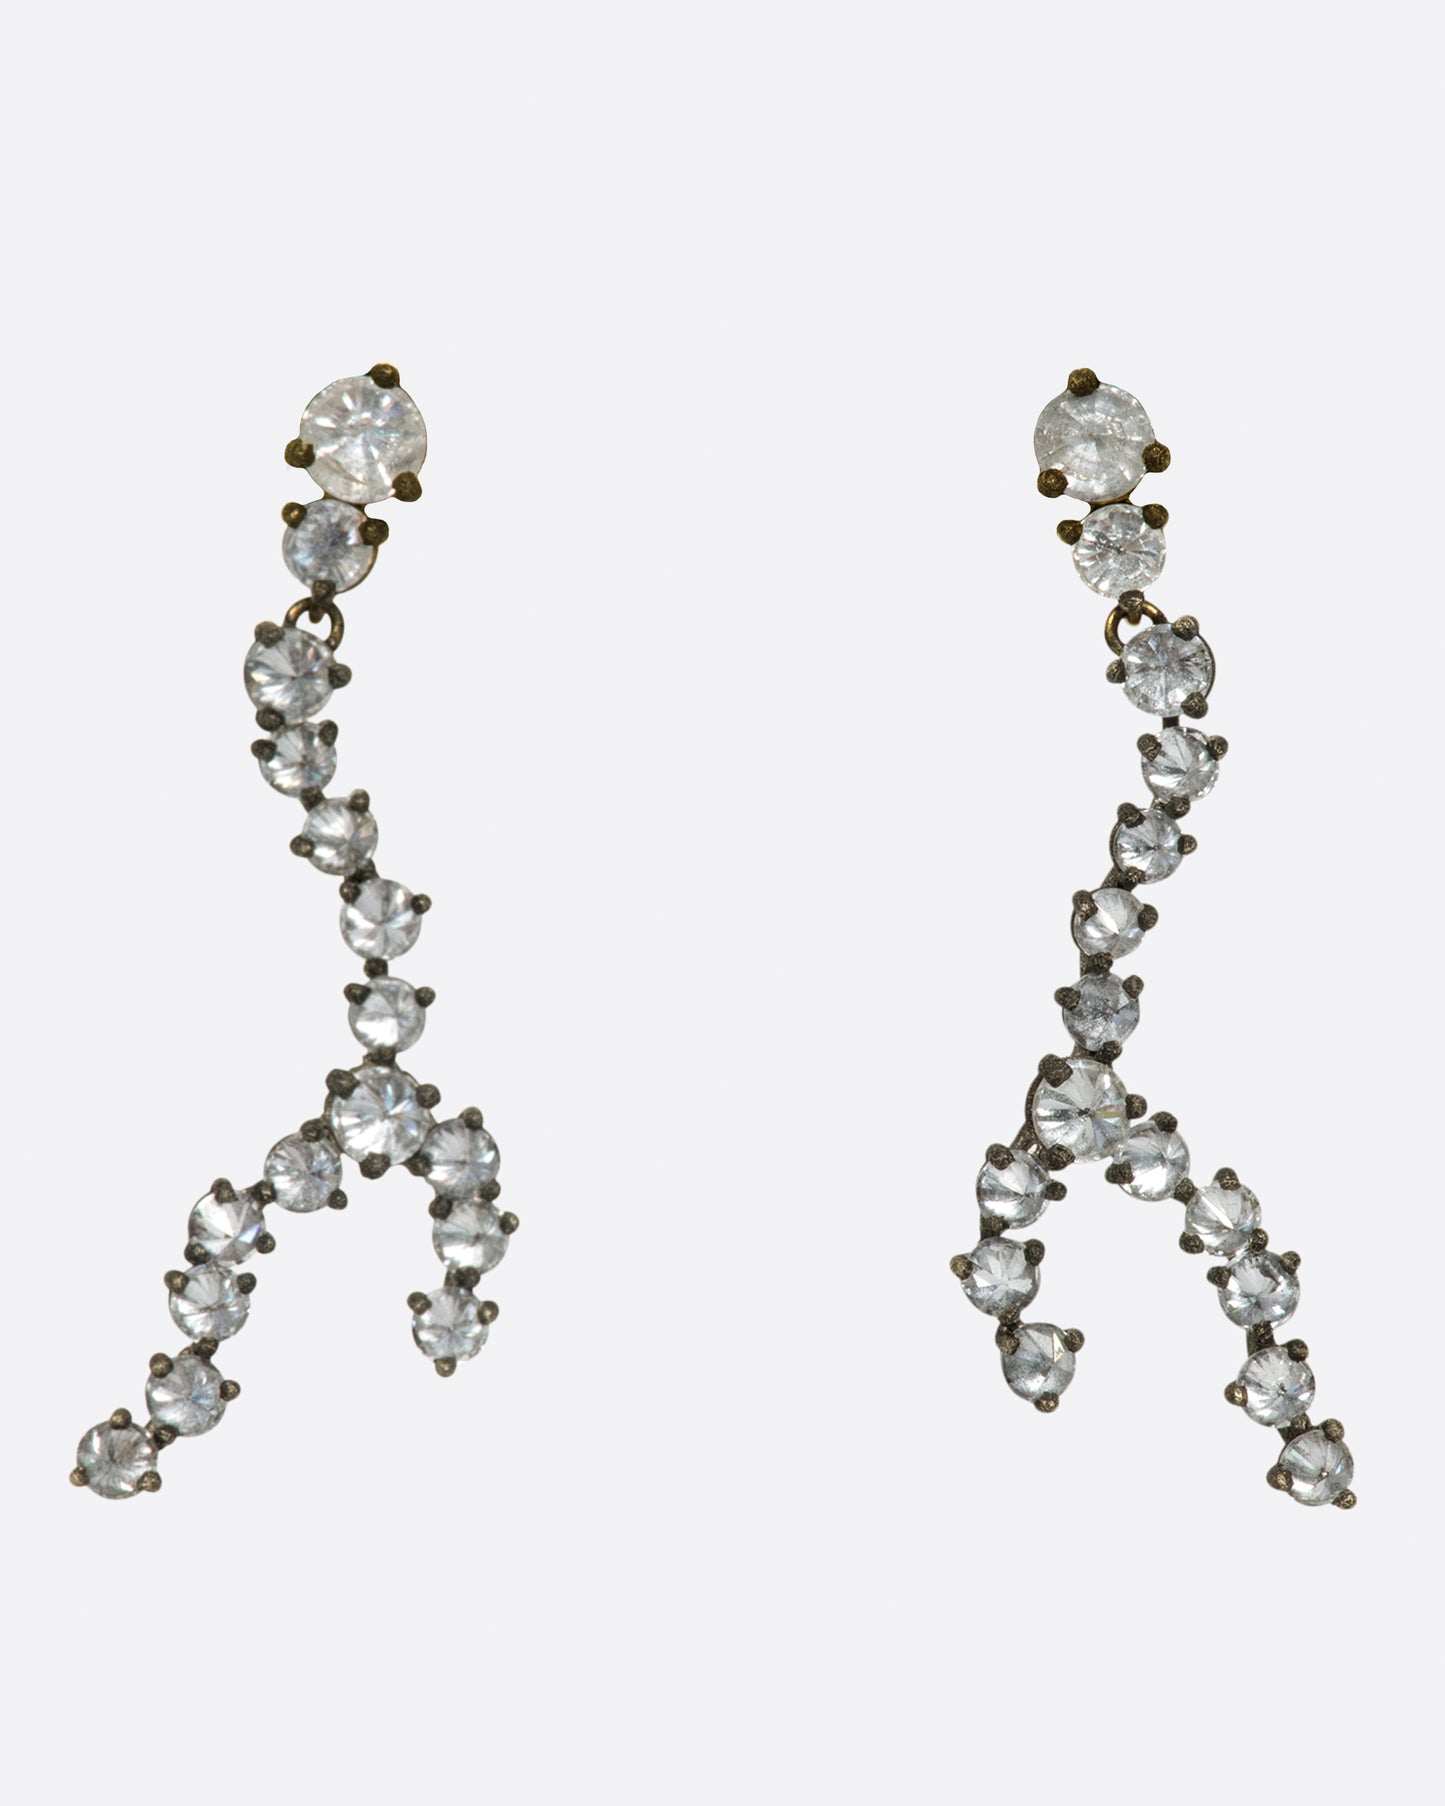 A pair of organically shaped earrings made from inverted diamonds set in darkened white gold settings.